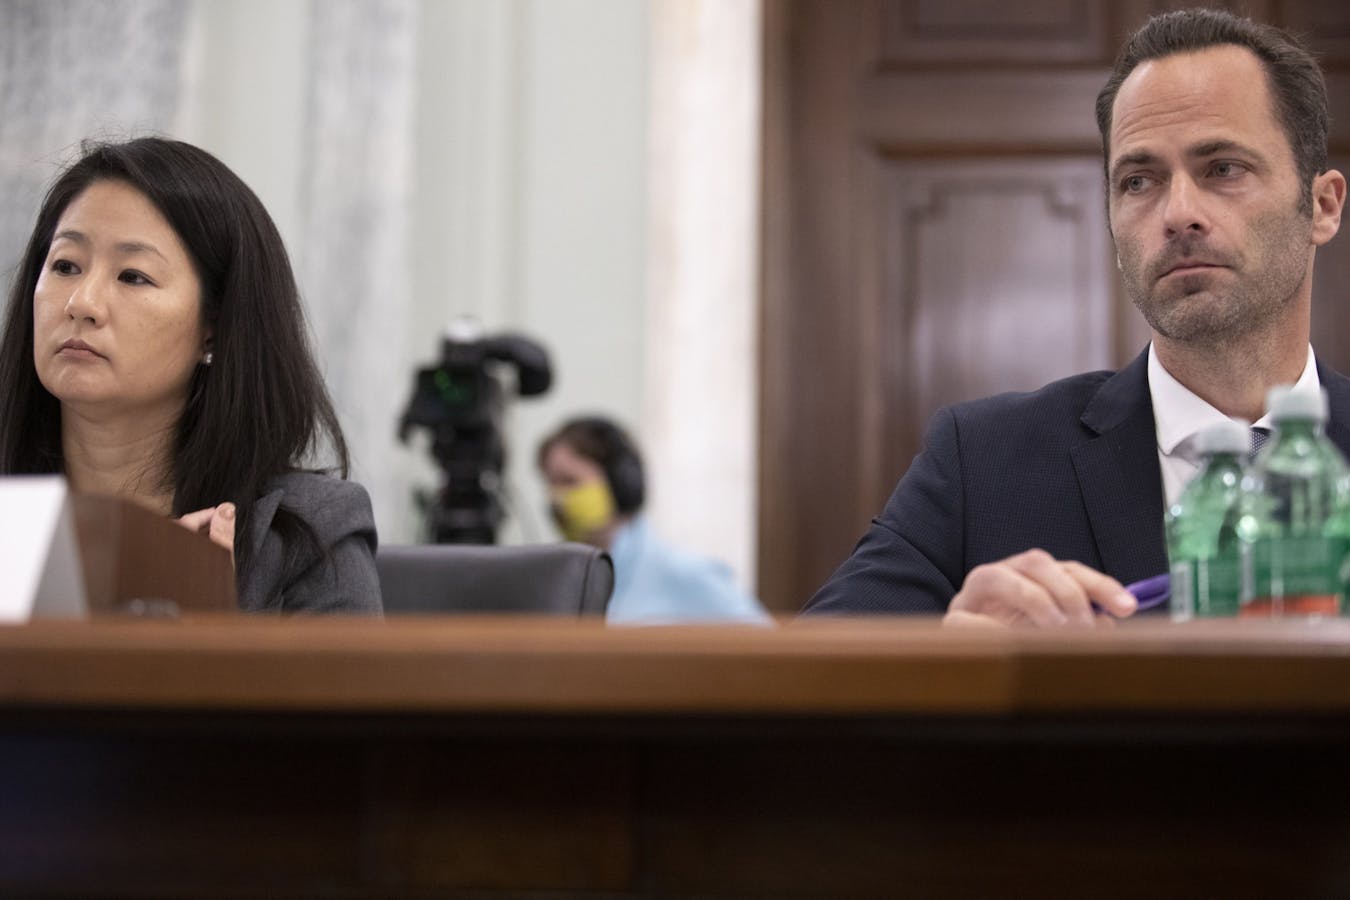 Jennifer Stout, vice president of global public policy at Snap, and Michael Beckerman, Americas vice president and head of public policy at TikTok, in a Senate hearing Tuesday.